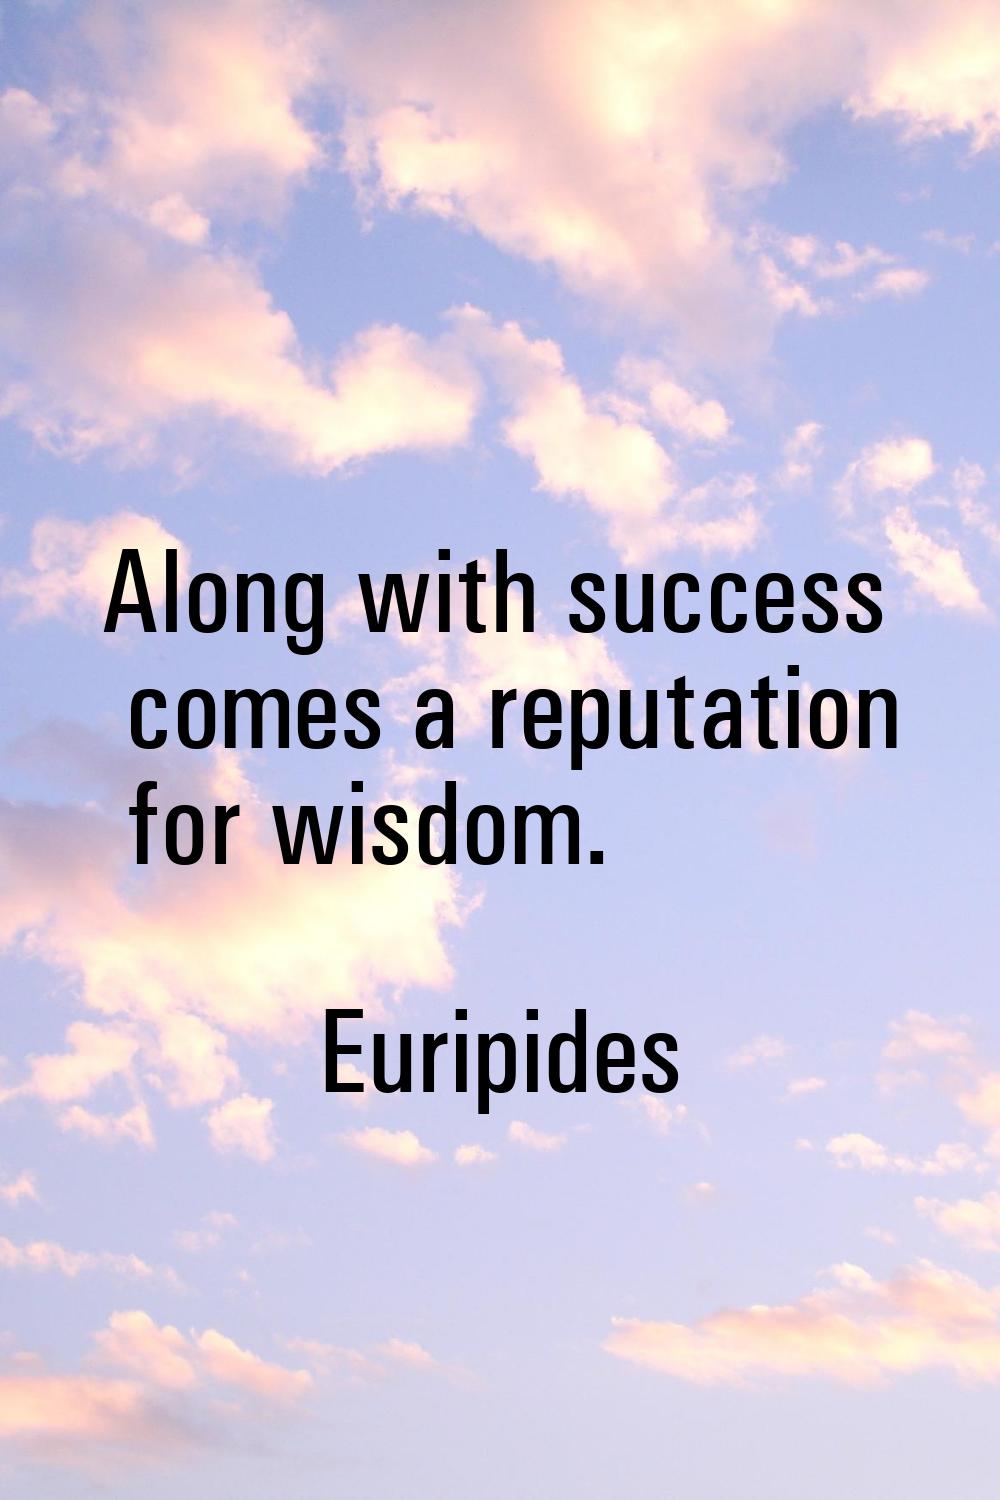 Along with success comes a reputation for wisdom.